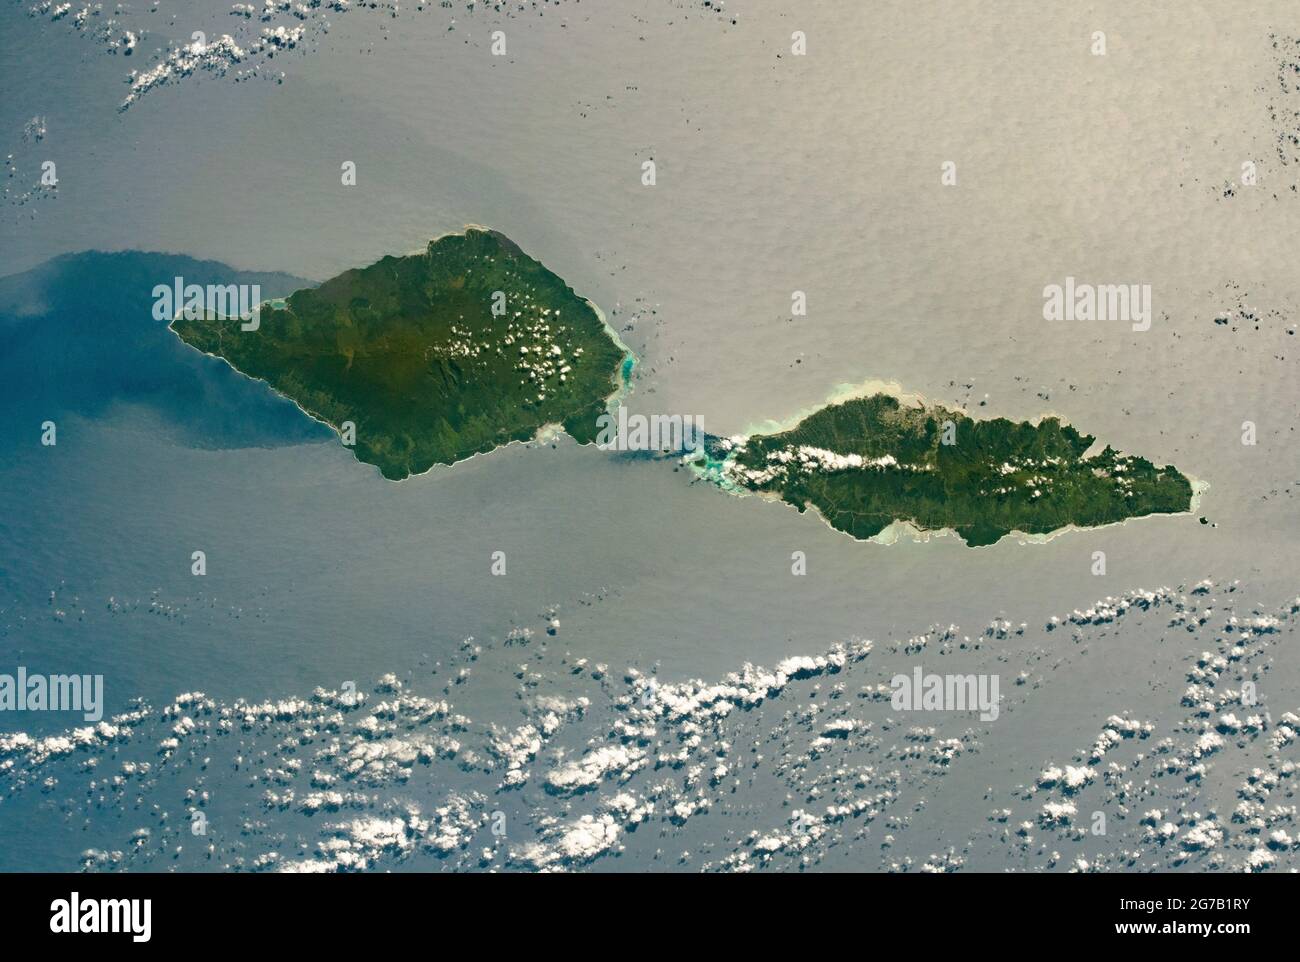 Savai'i and Upolu, Samoa, photographed from the International Space Station as it passed over the South Pacific Ocean. Savai'i, the westernmost Samoan Island, is 80 km (50 mi) long; Upolu is nearly as long (74 km/46 mi). The dark green centres of the islands reflect the denser tropical forests and higher elevations in comparison to the lower, light-green coastal regions around the edges. Apolima Strait separates the 2 islands. A unique, optimised and digitally enhanced version of an NASA image / credit NASA Stock Photo